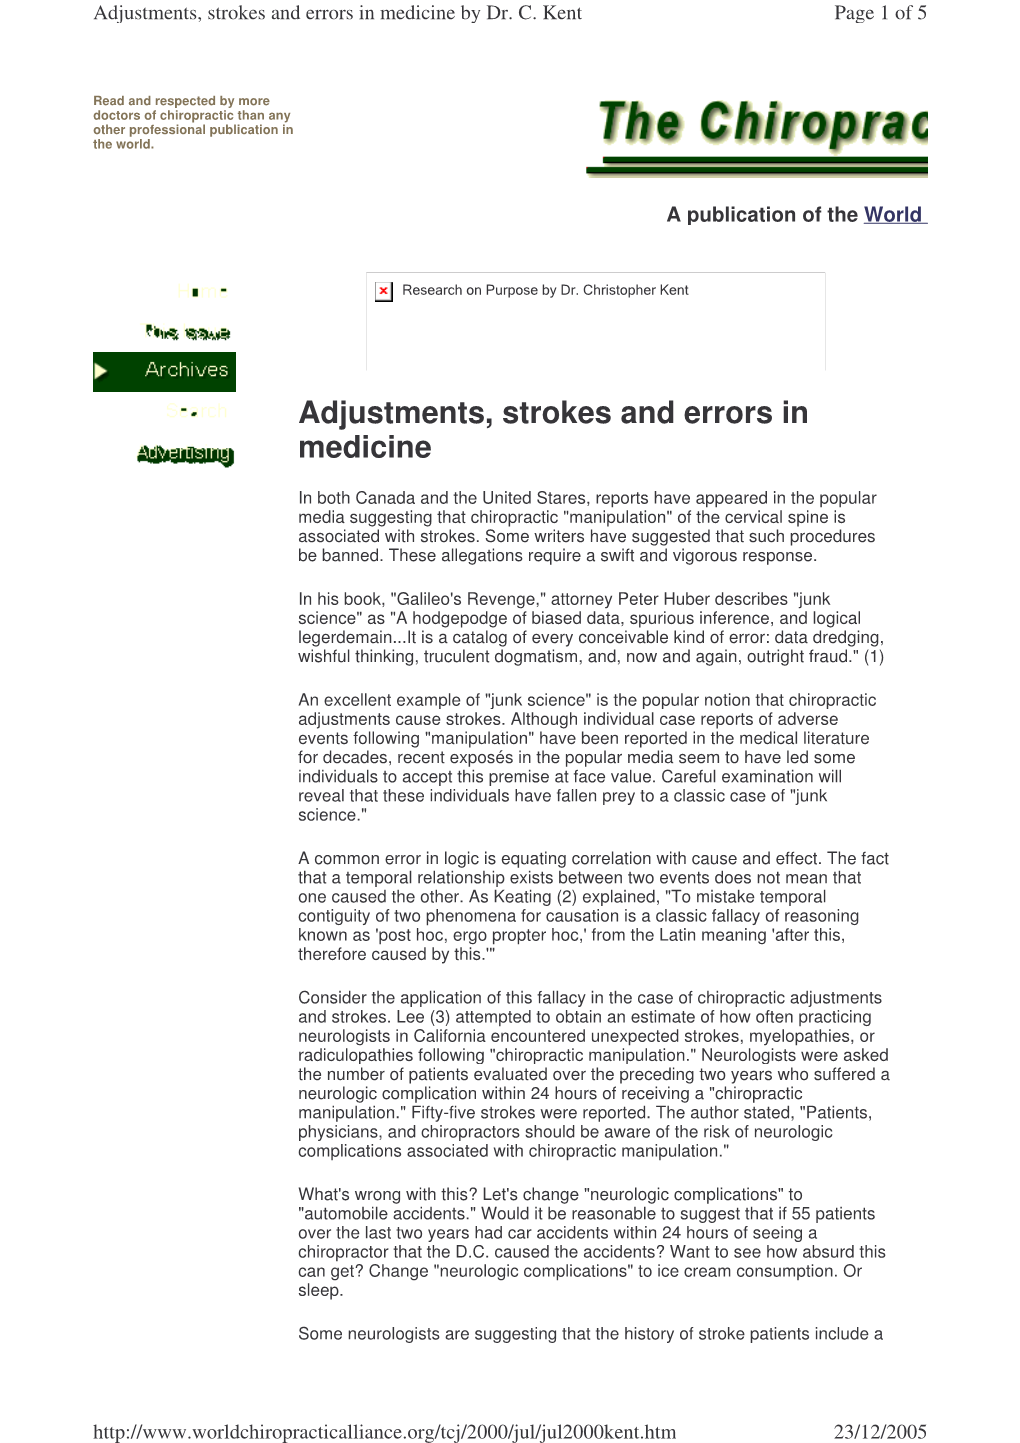 Adjustments, Strokes and Errors in Medicine by Dr